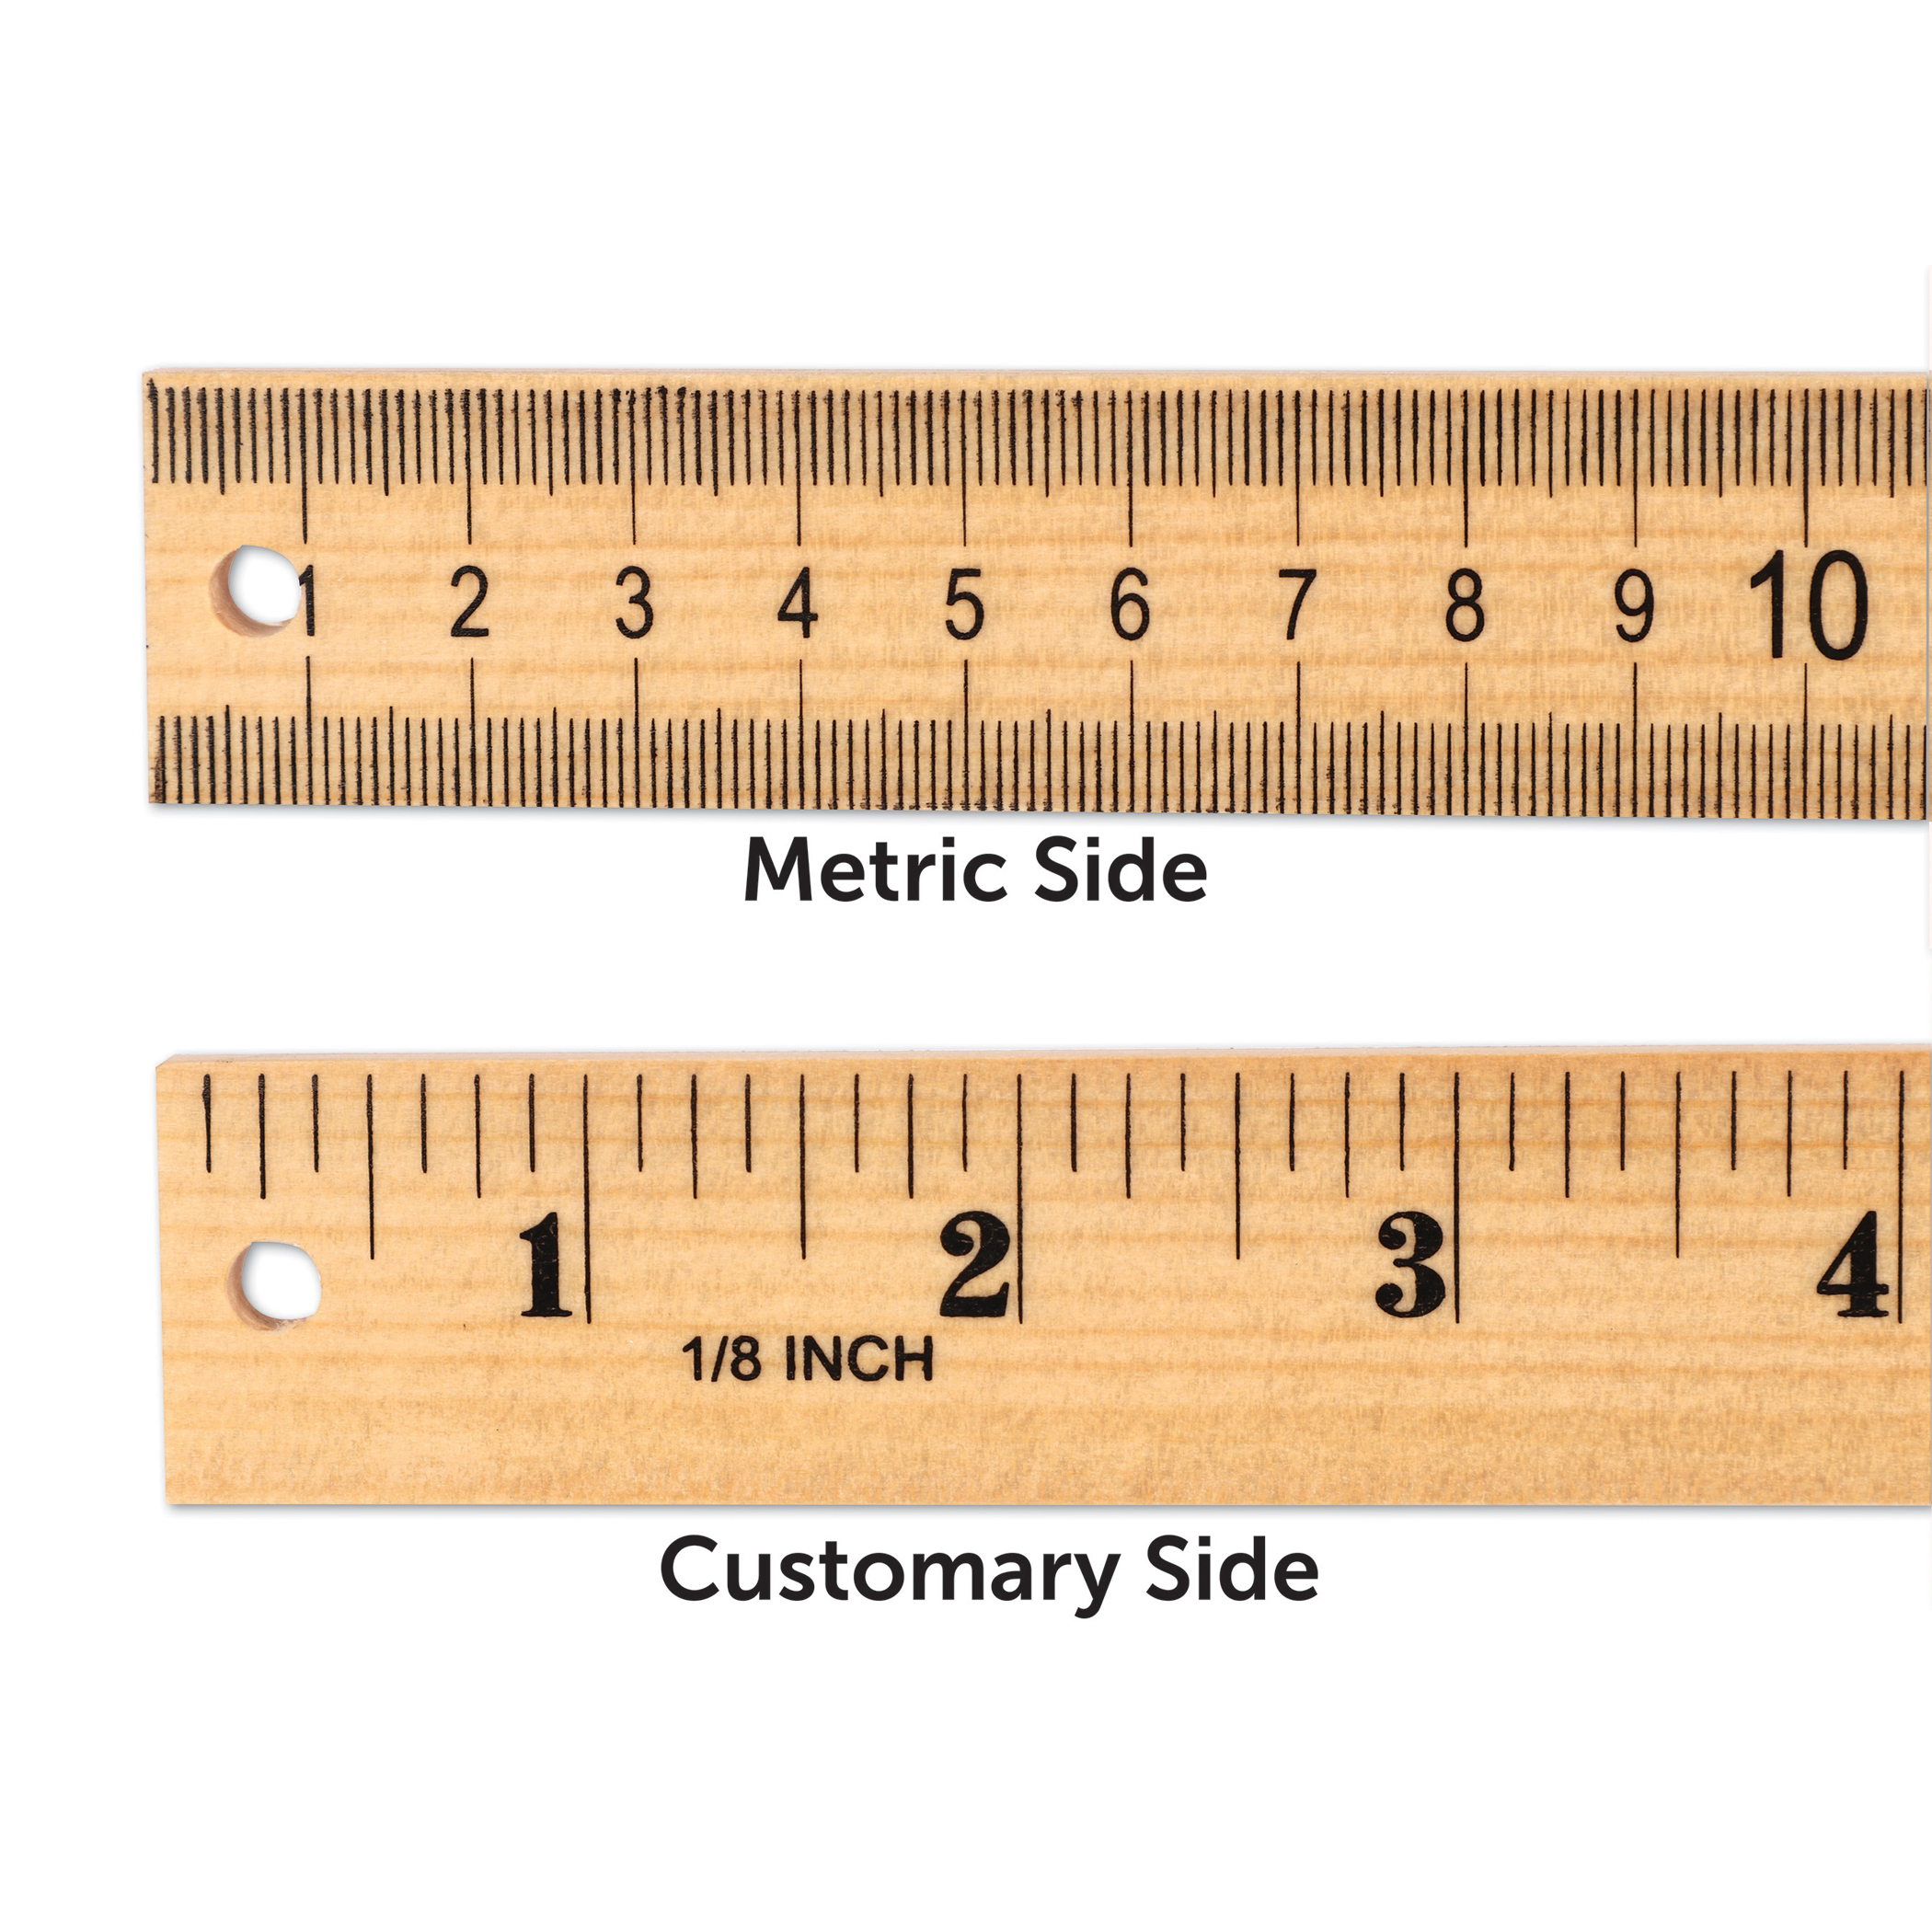 The Teachers' Lounge®  Wooden Meter Stick Ruler, Natural Wood, 36 Inches